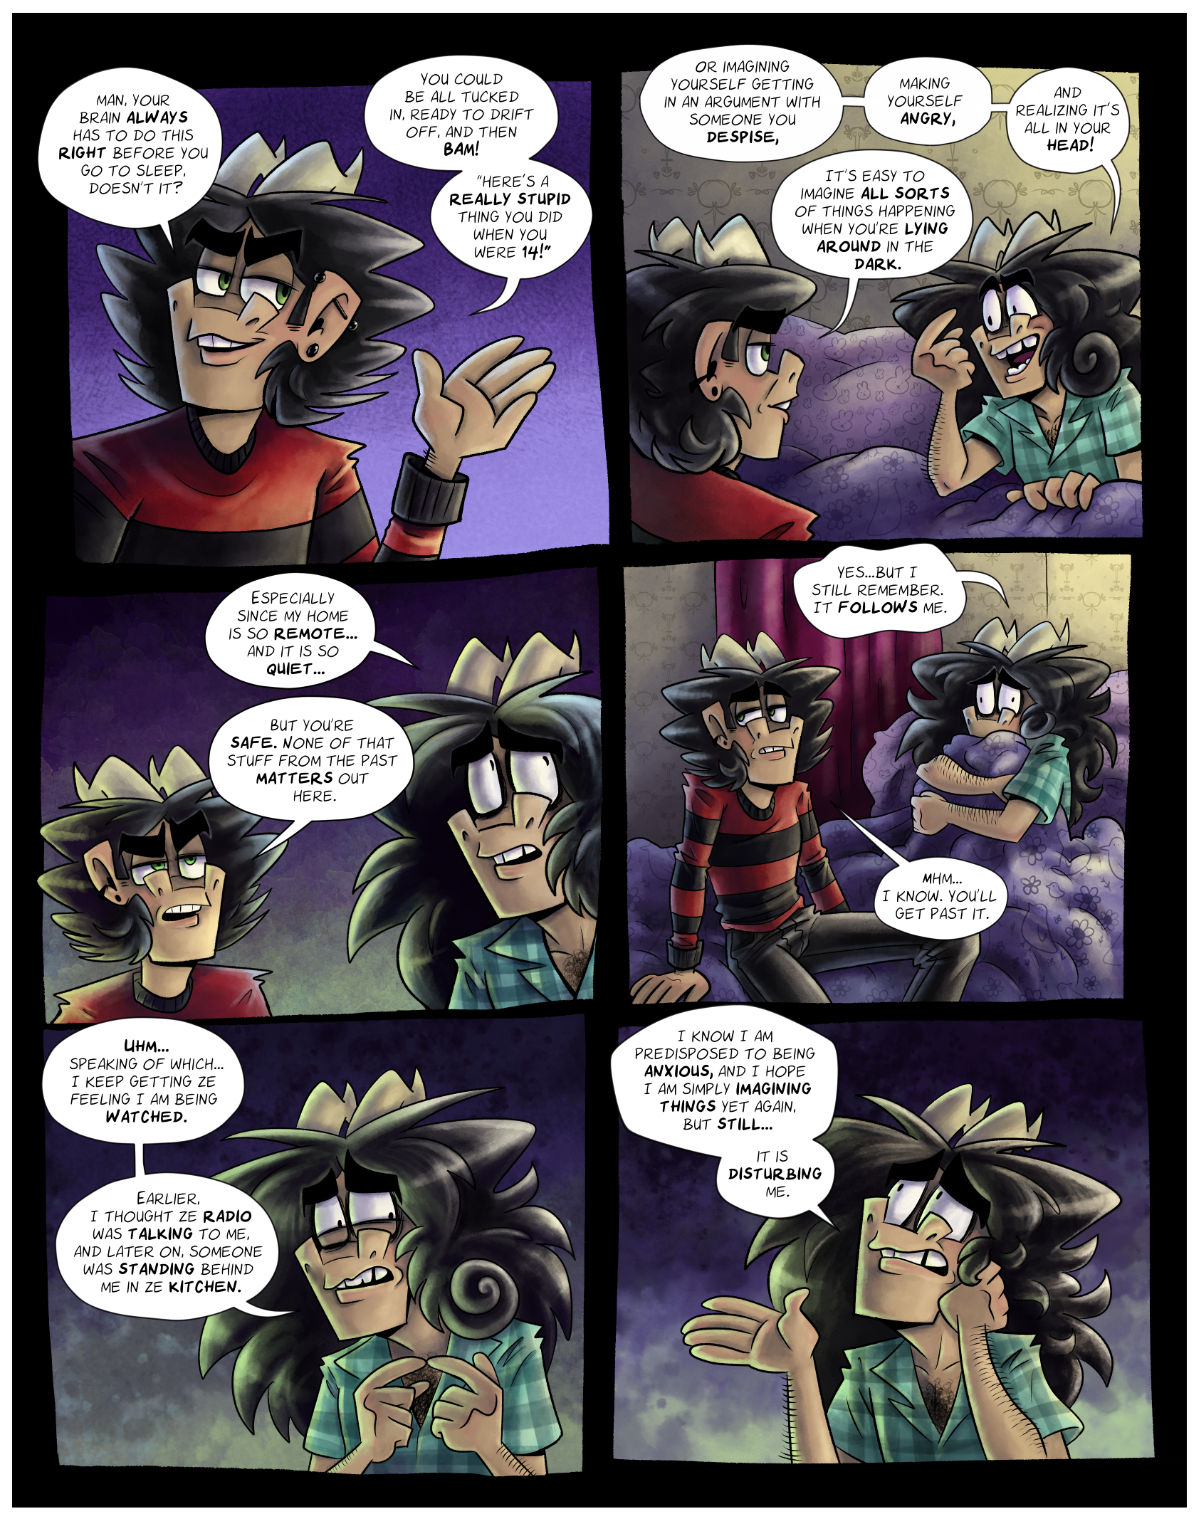 Ch 2 Page 33: Nagging Doubts